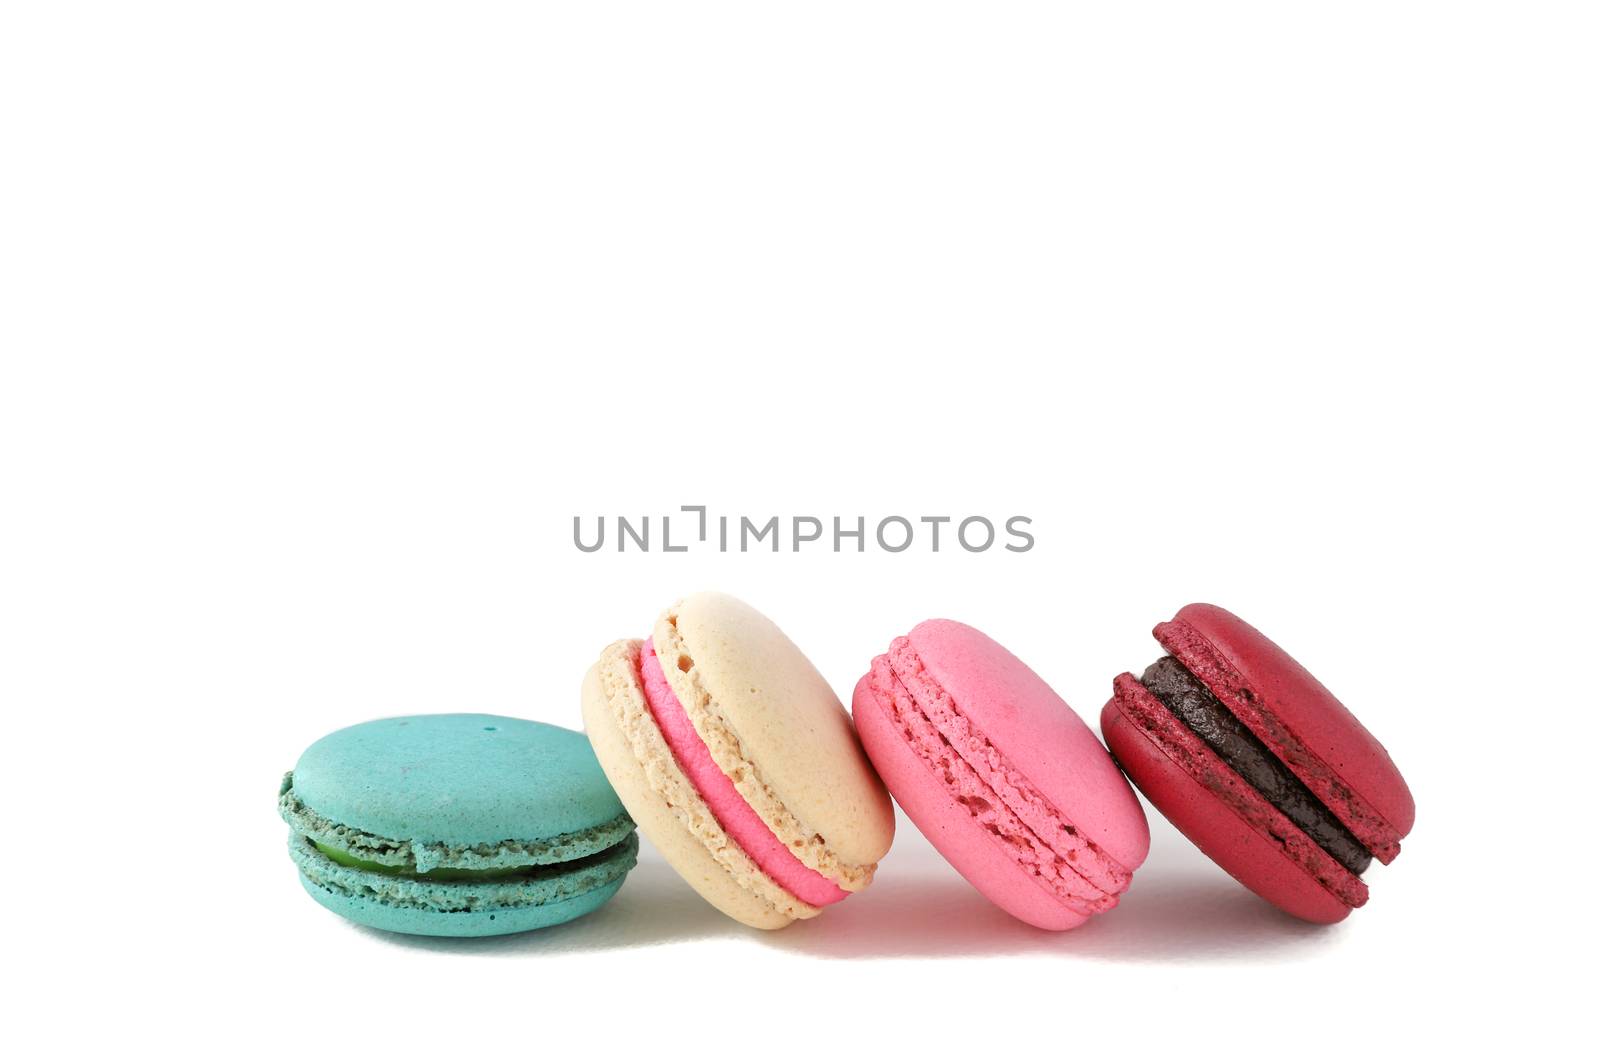 colorful macaroons isolated on white background